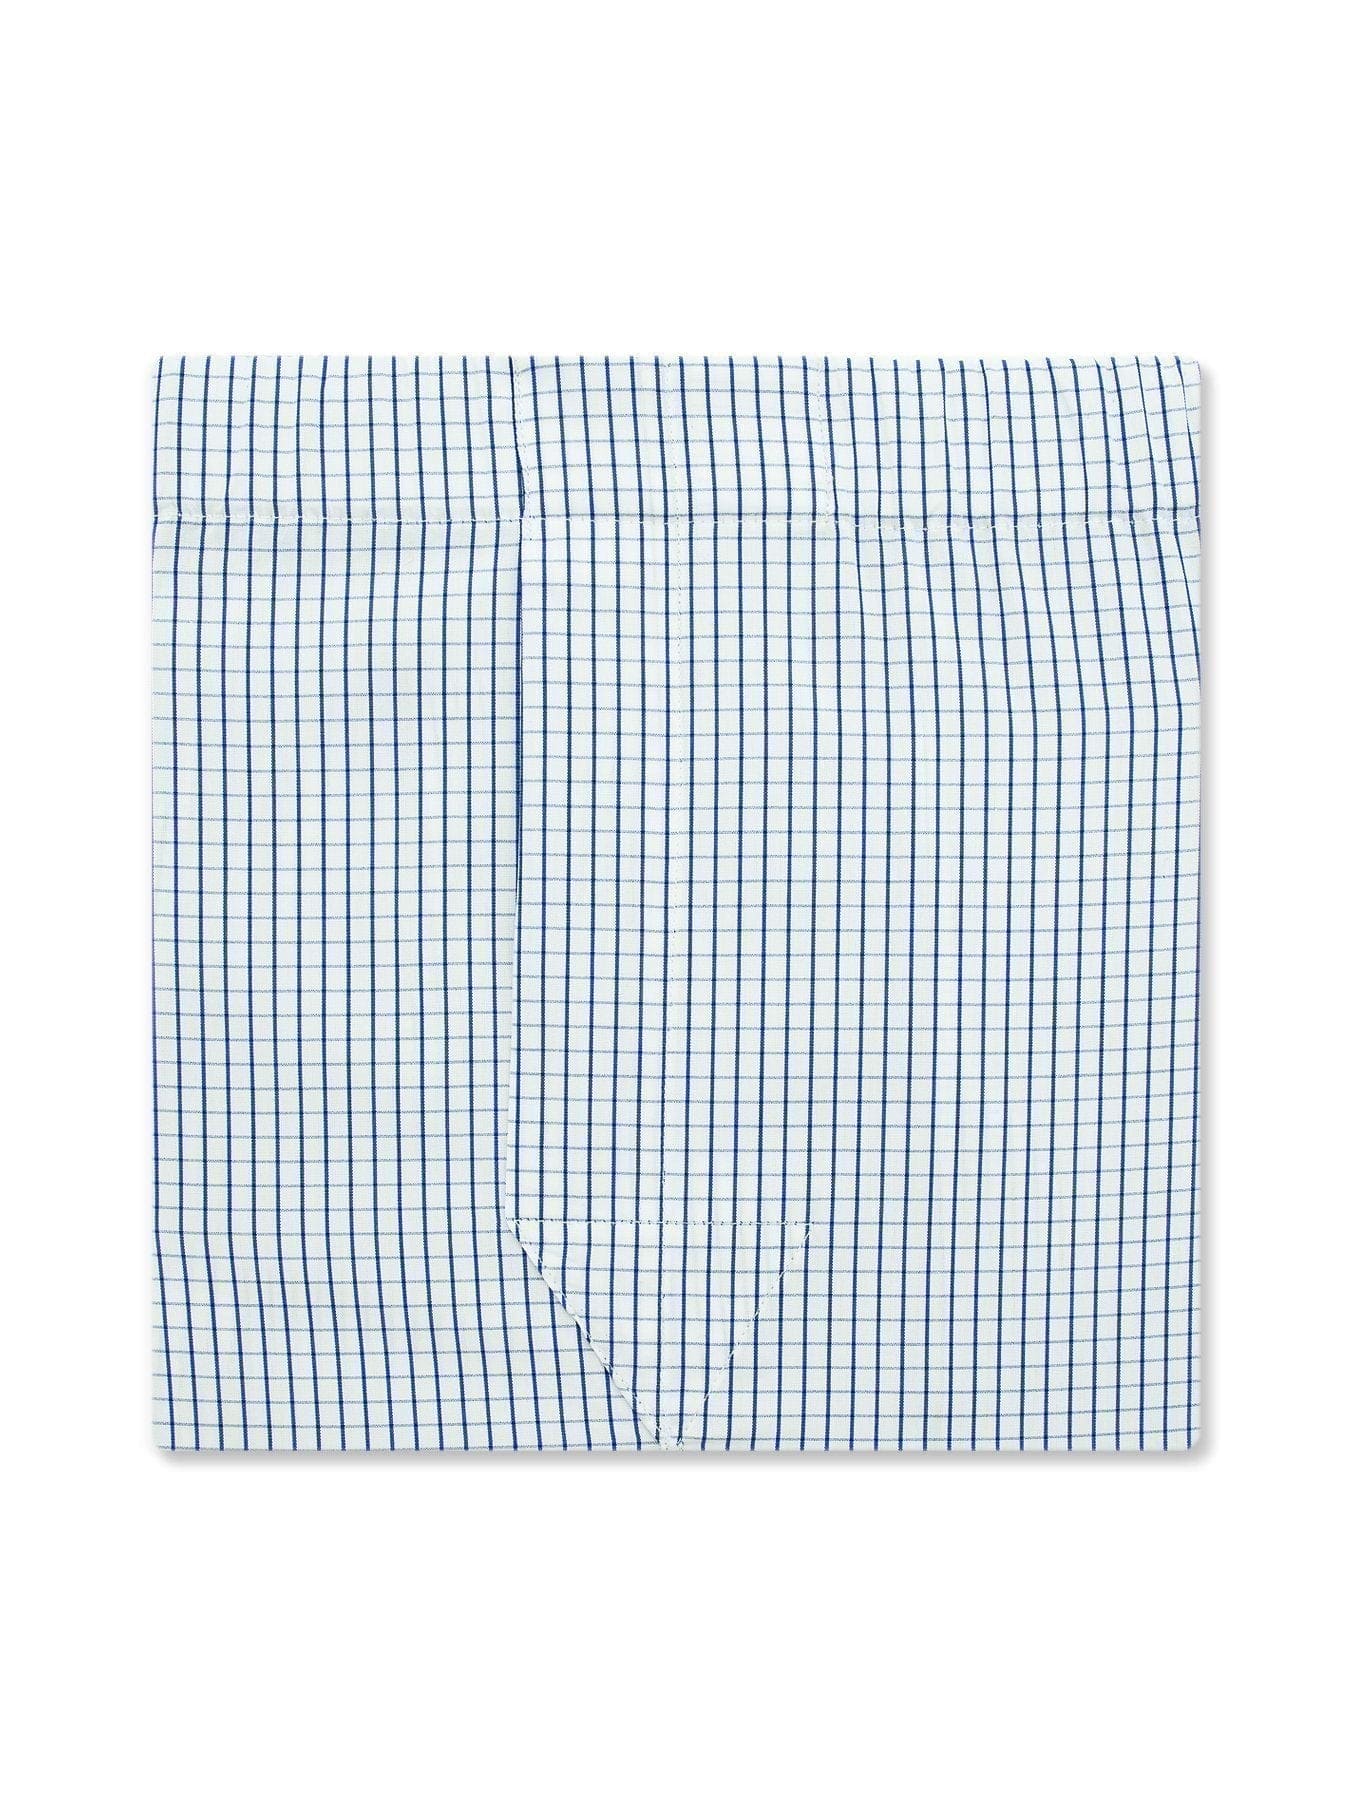 Classic Boxer Shorts in a Navy & White Large Graph Check Poplin Cotton